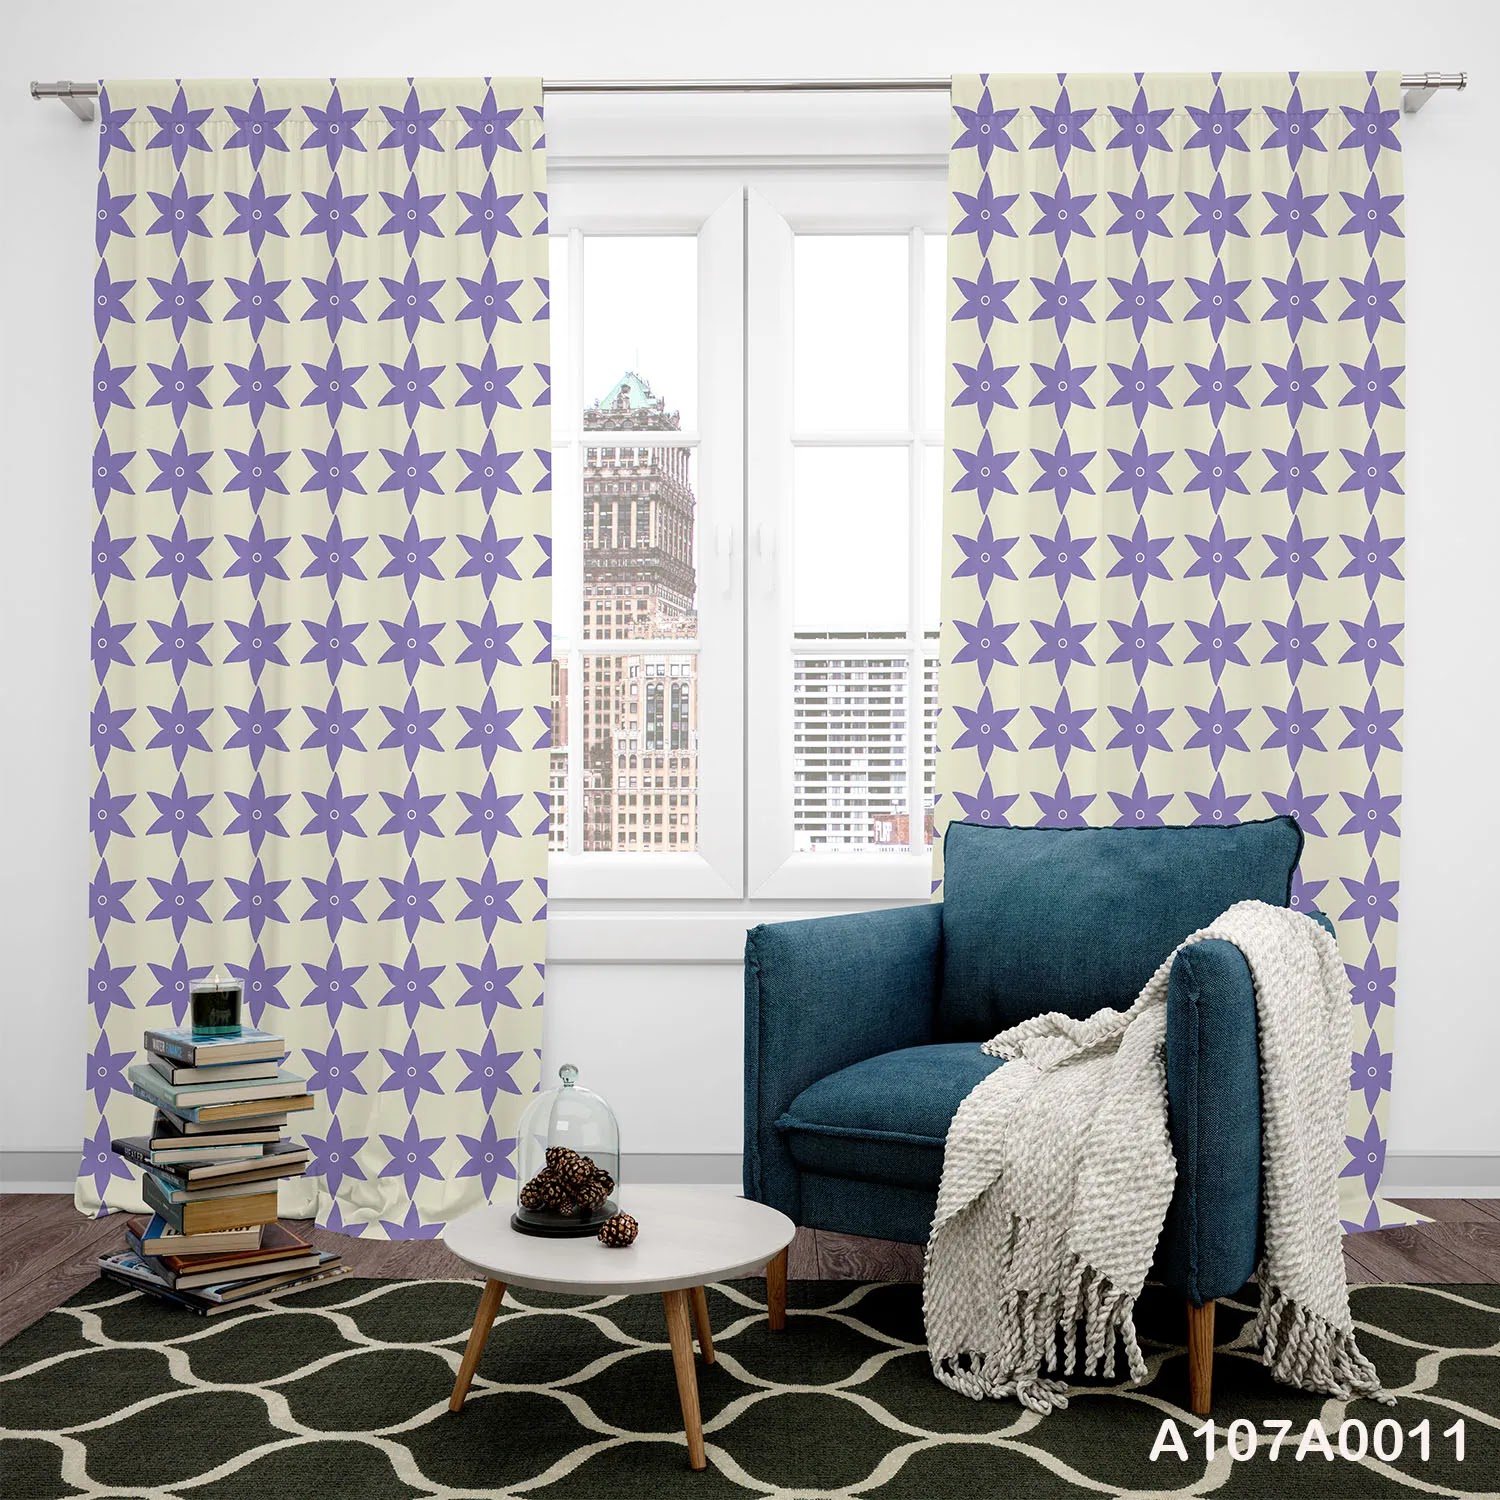 Curtains with white color and Mauve stars for office, kitchen and rooms